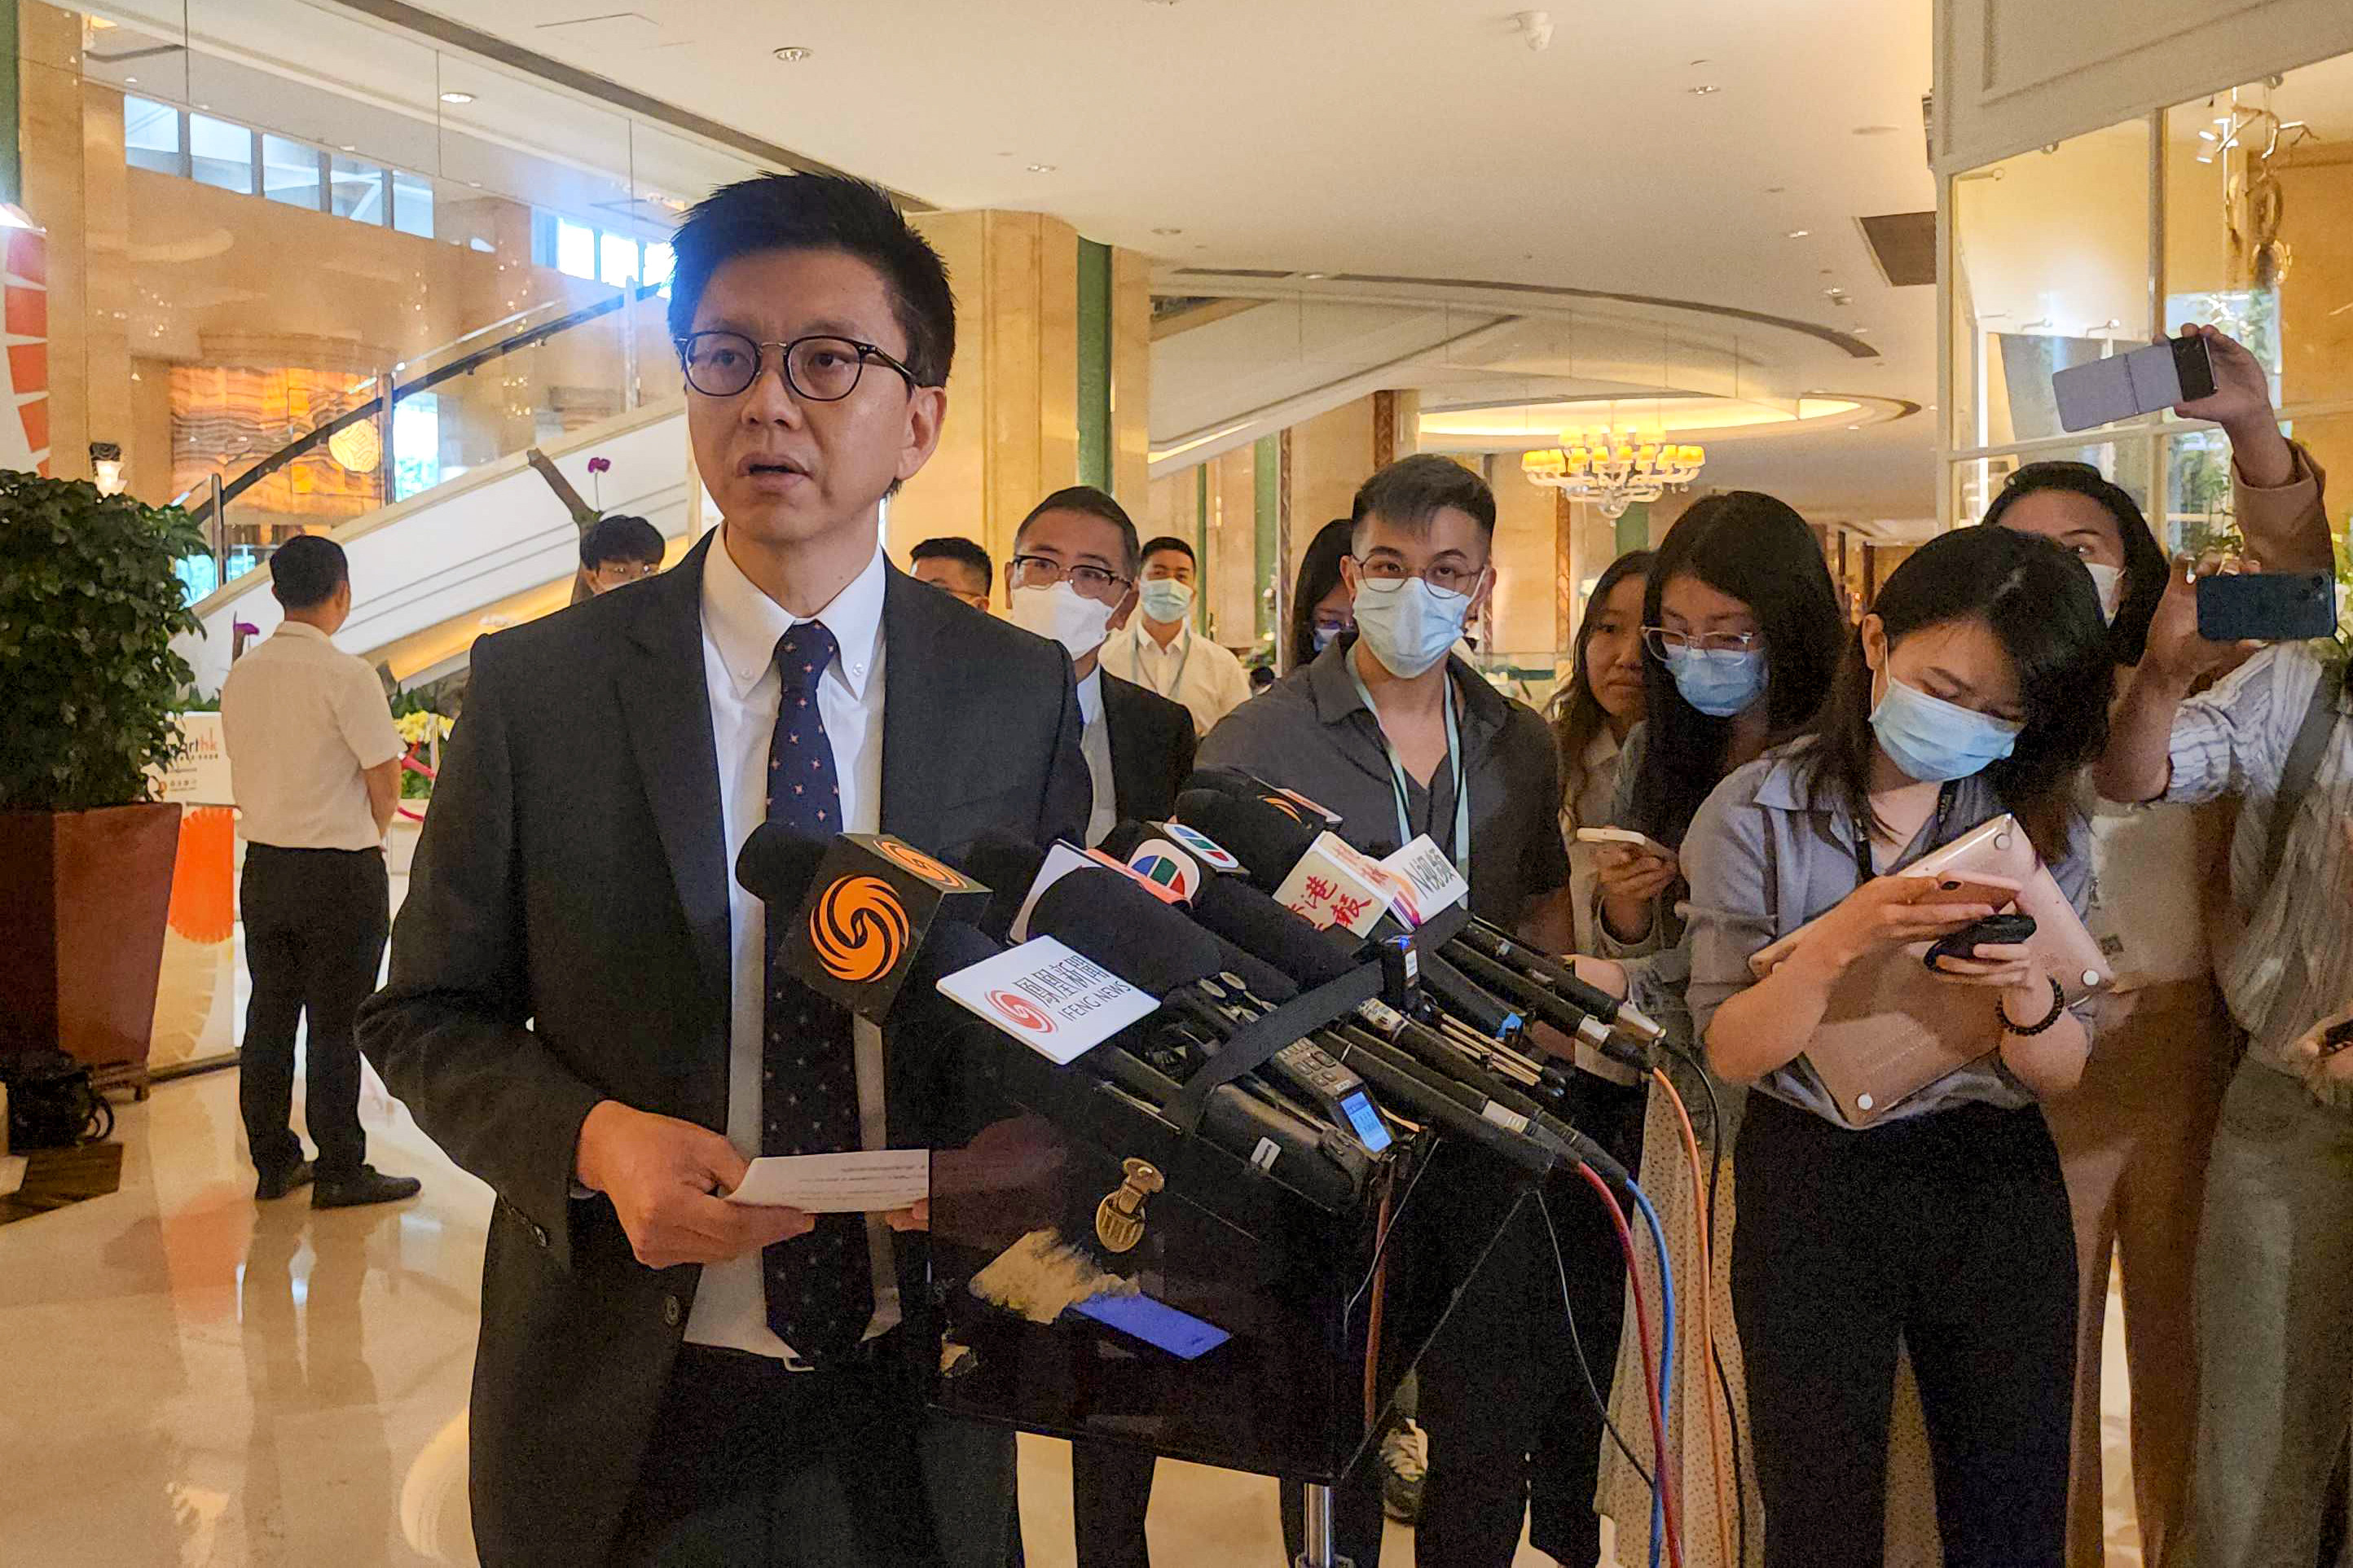 Cathay Pacific CEO Ronald Lam Siu-por apologised at a press briefing in Guangzhou for a discrimination event by its staff in May. Photo: SCMP/Iris Ouyang